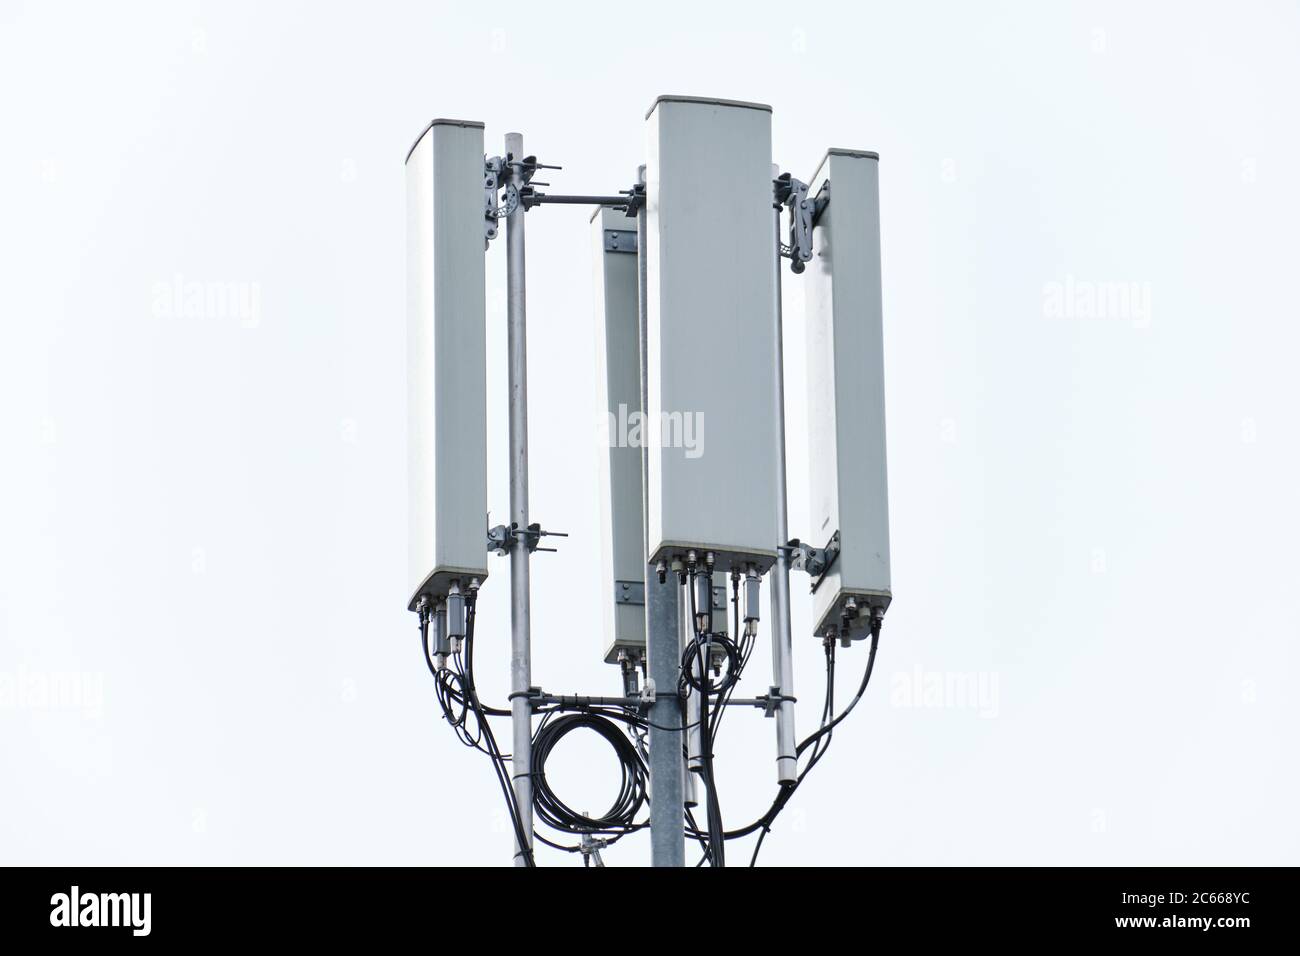 Cellular phone network telecommunication tower on the building roof. Stock Photo